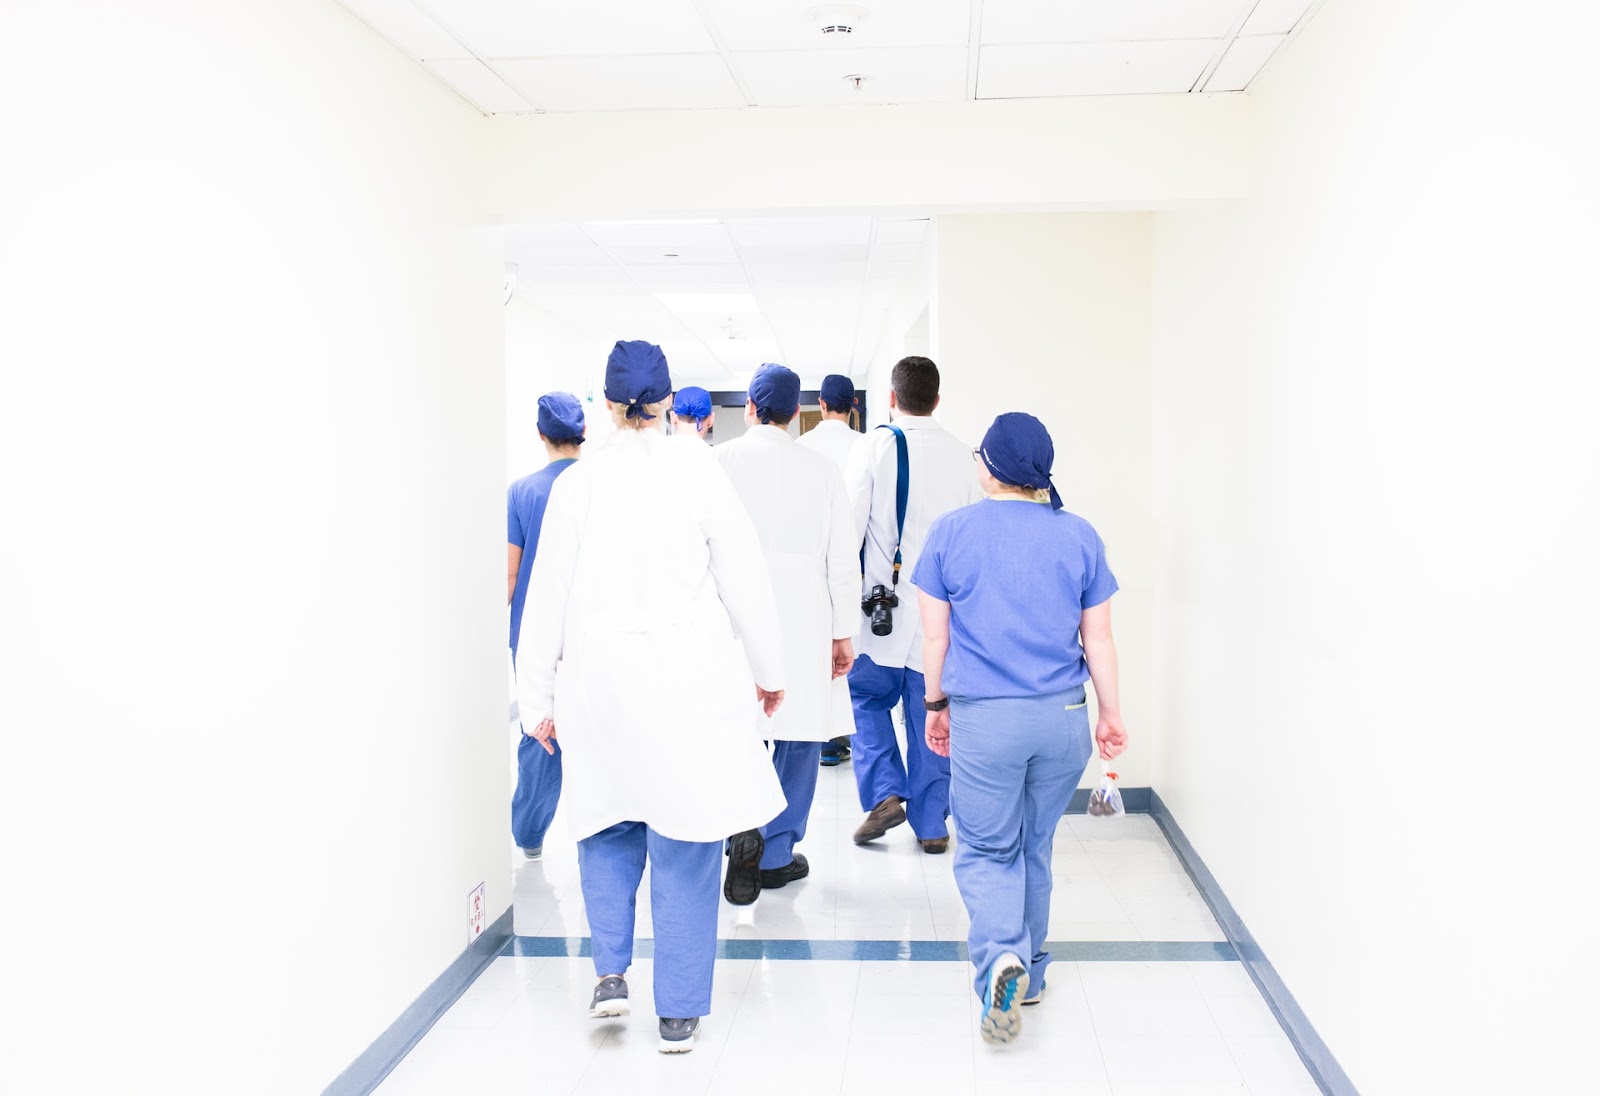 Gift Ideas for Nurses; a group of nurses and doctors walking in a brightly lit passage